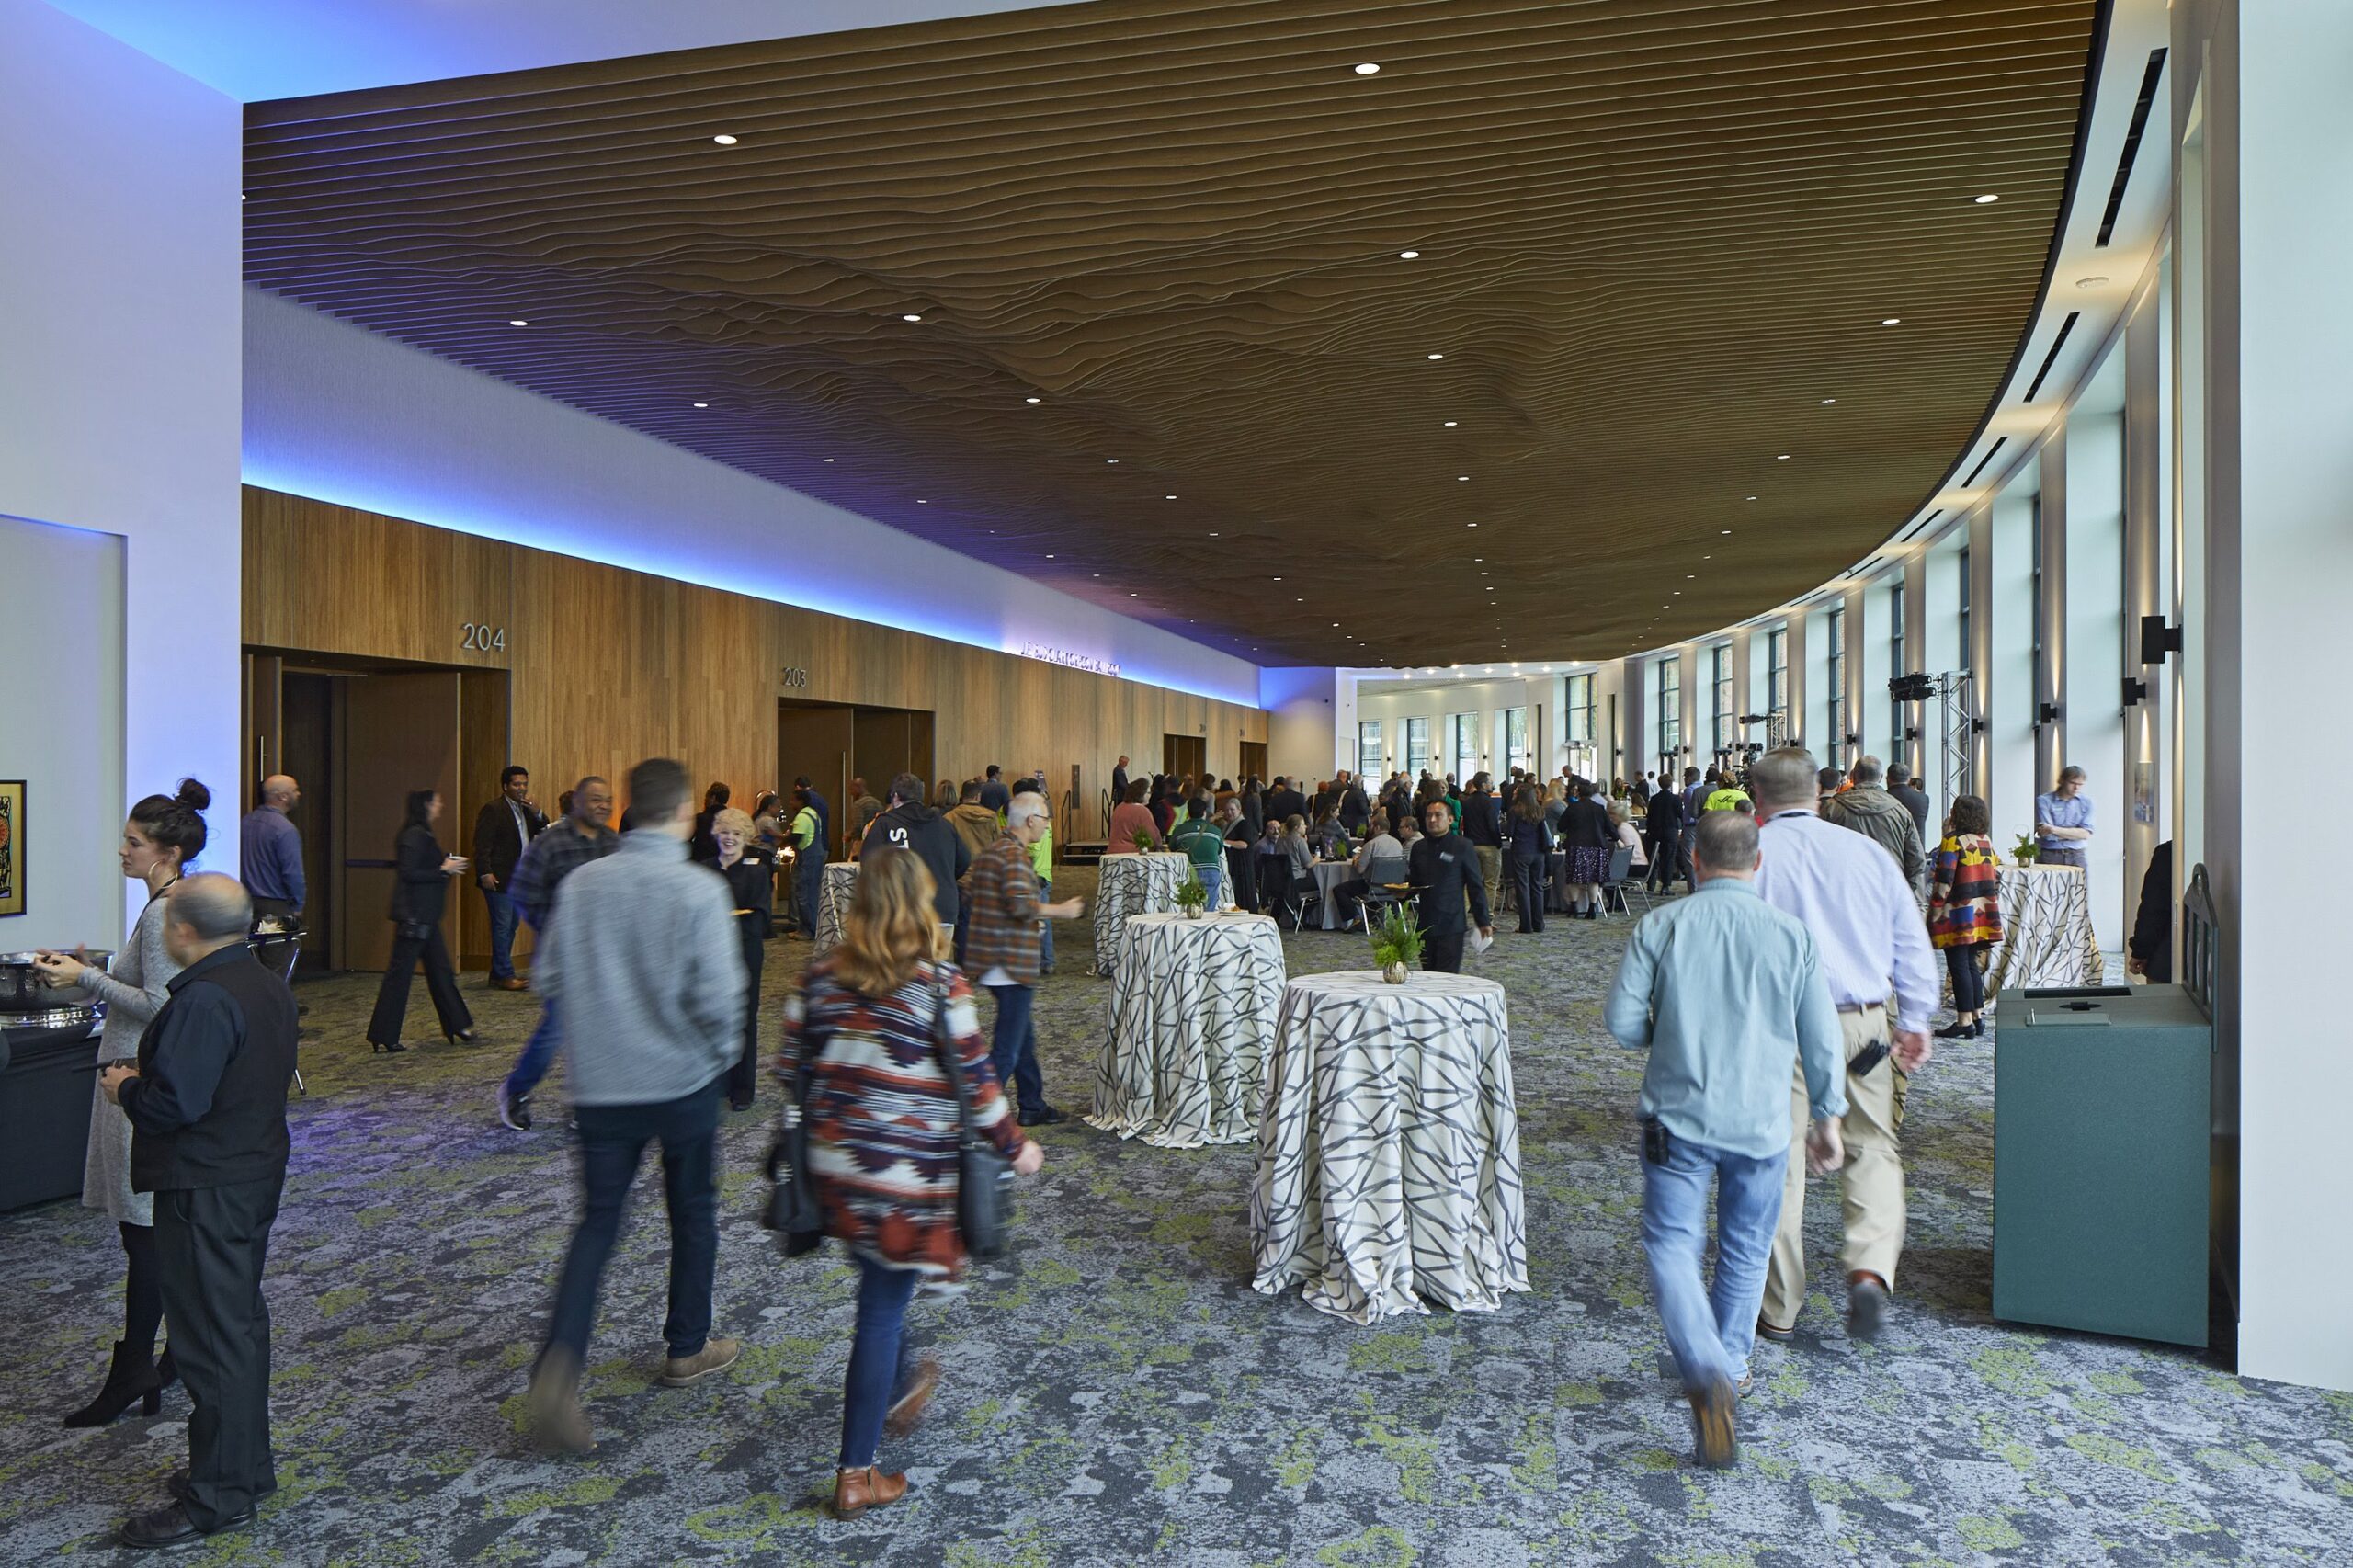 The pre-function ballroom at the Oregon Convention Center. Attendees are walking through the space in between small tables. Blue lighting runs along the wood paneled ceiling.